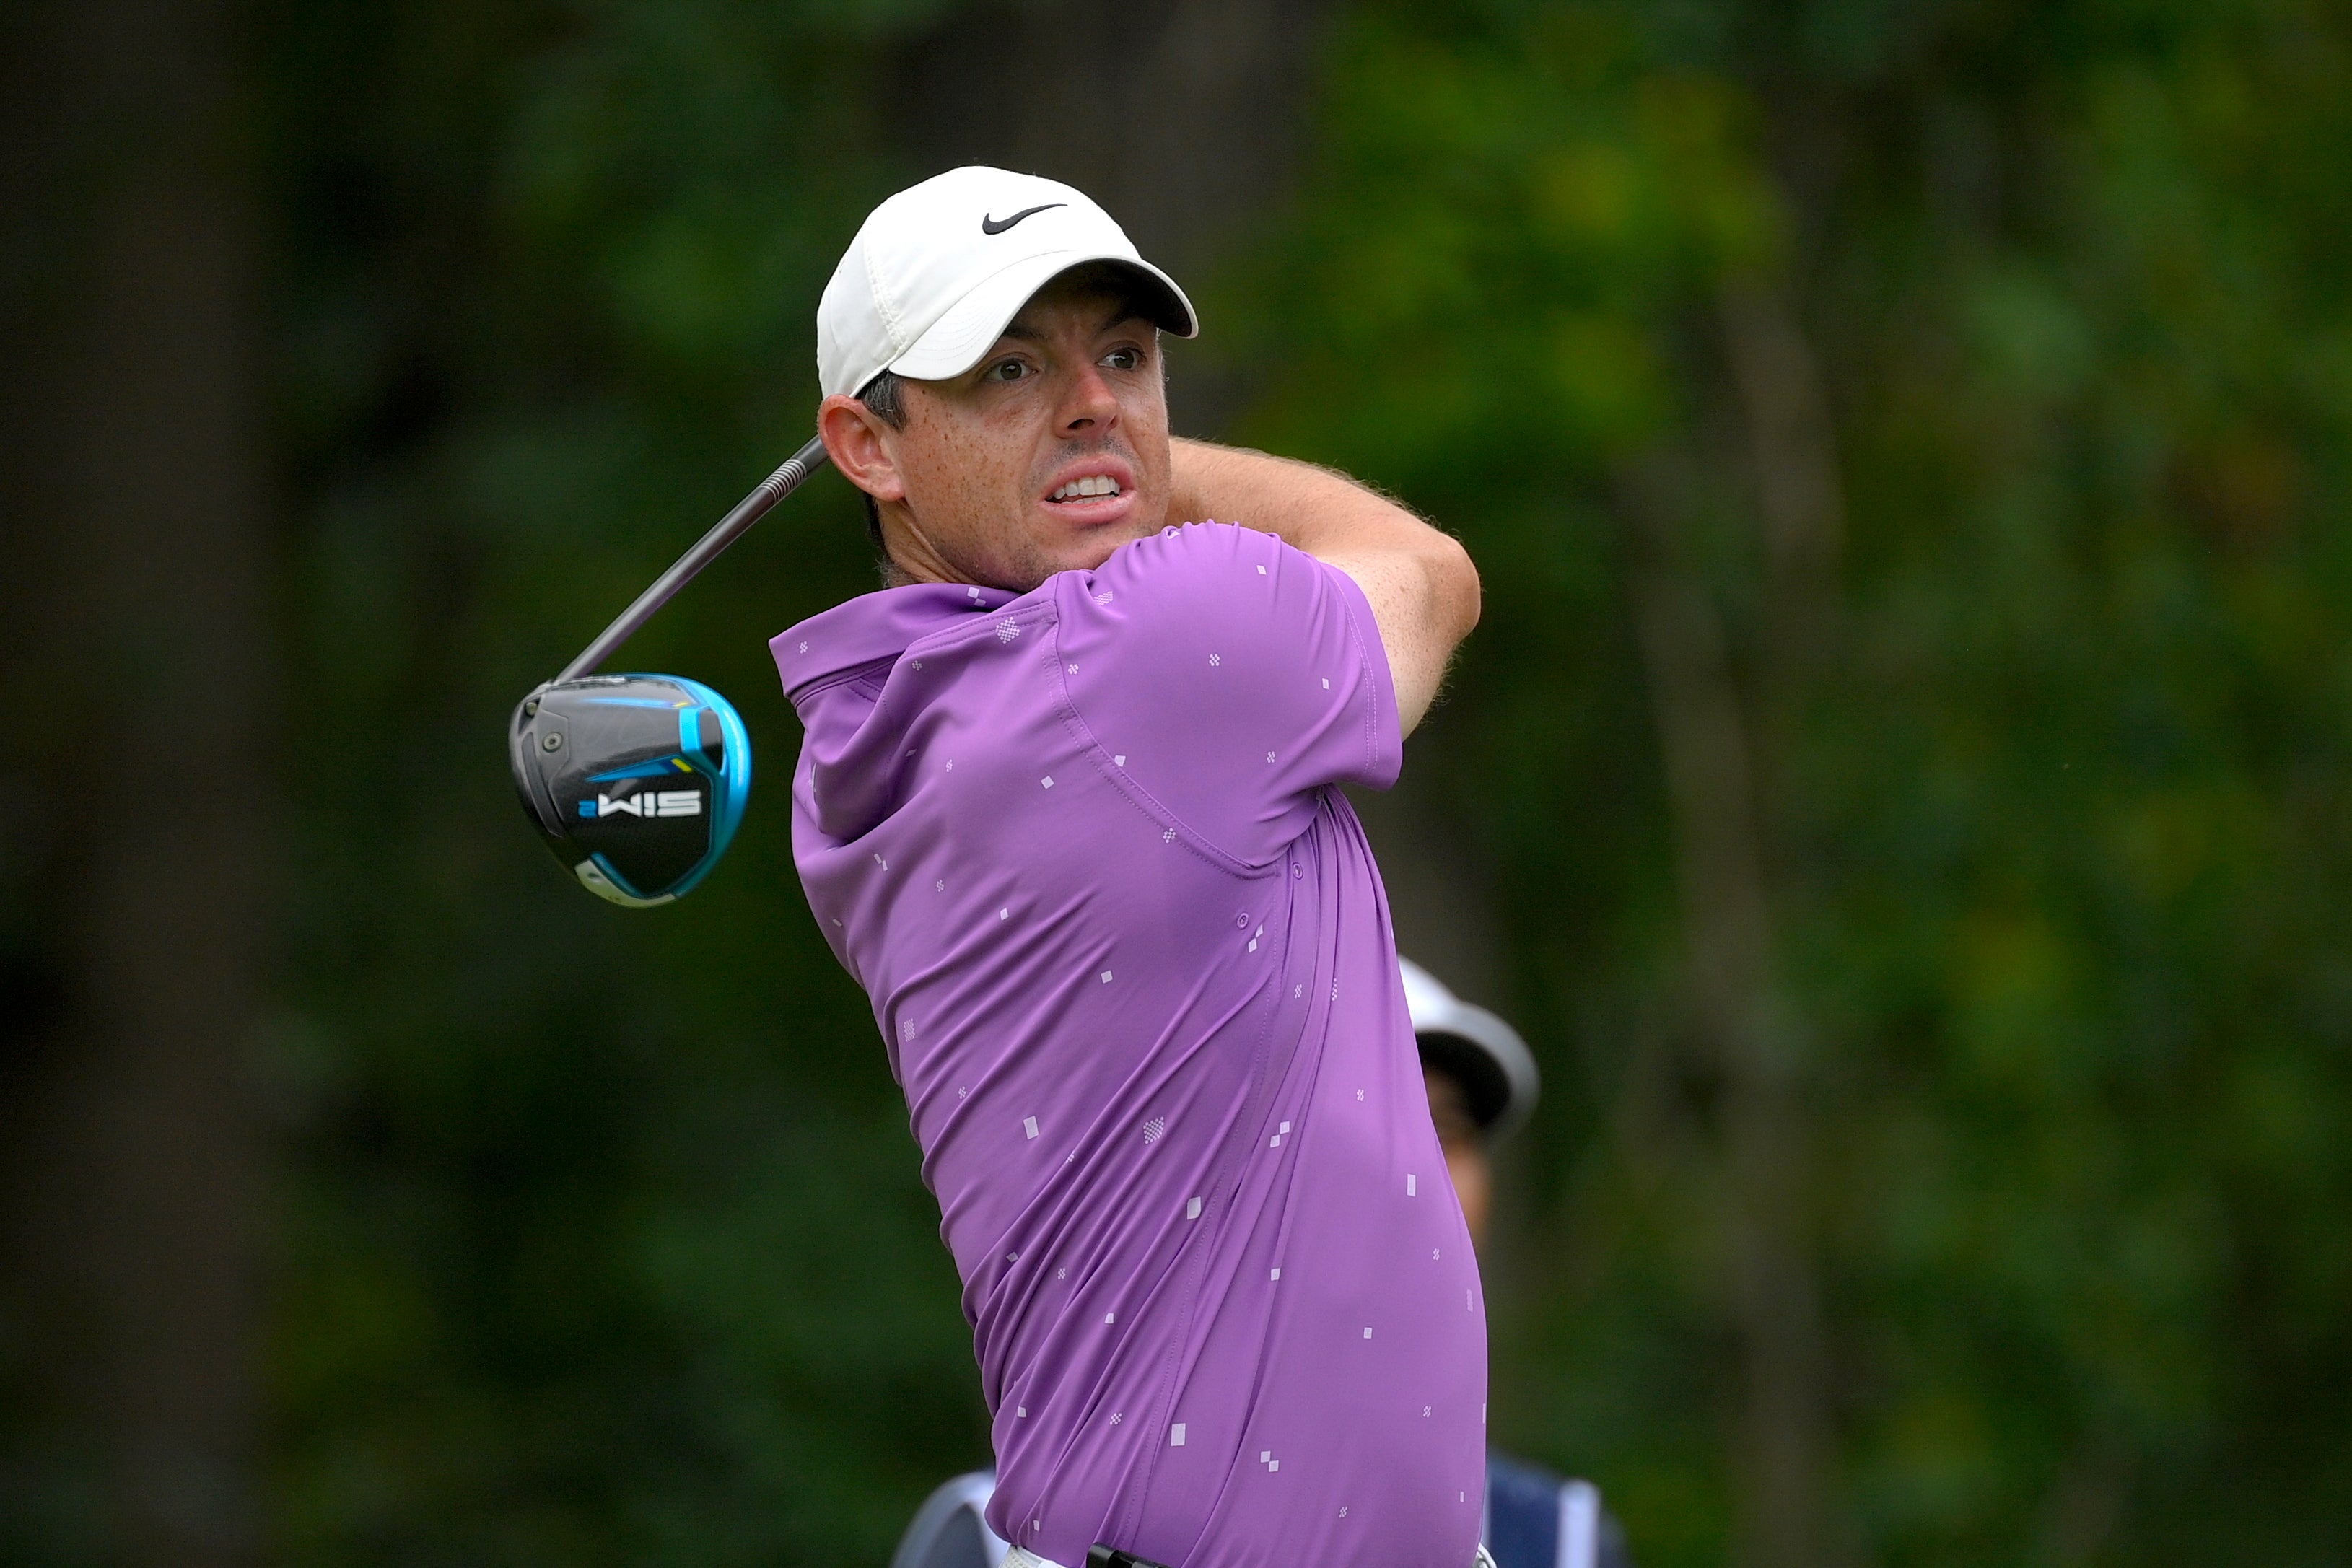 Rory McIlroy is one of the biggest names on the team(Nick Wass/AP)